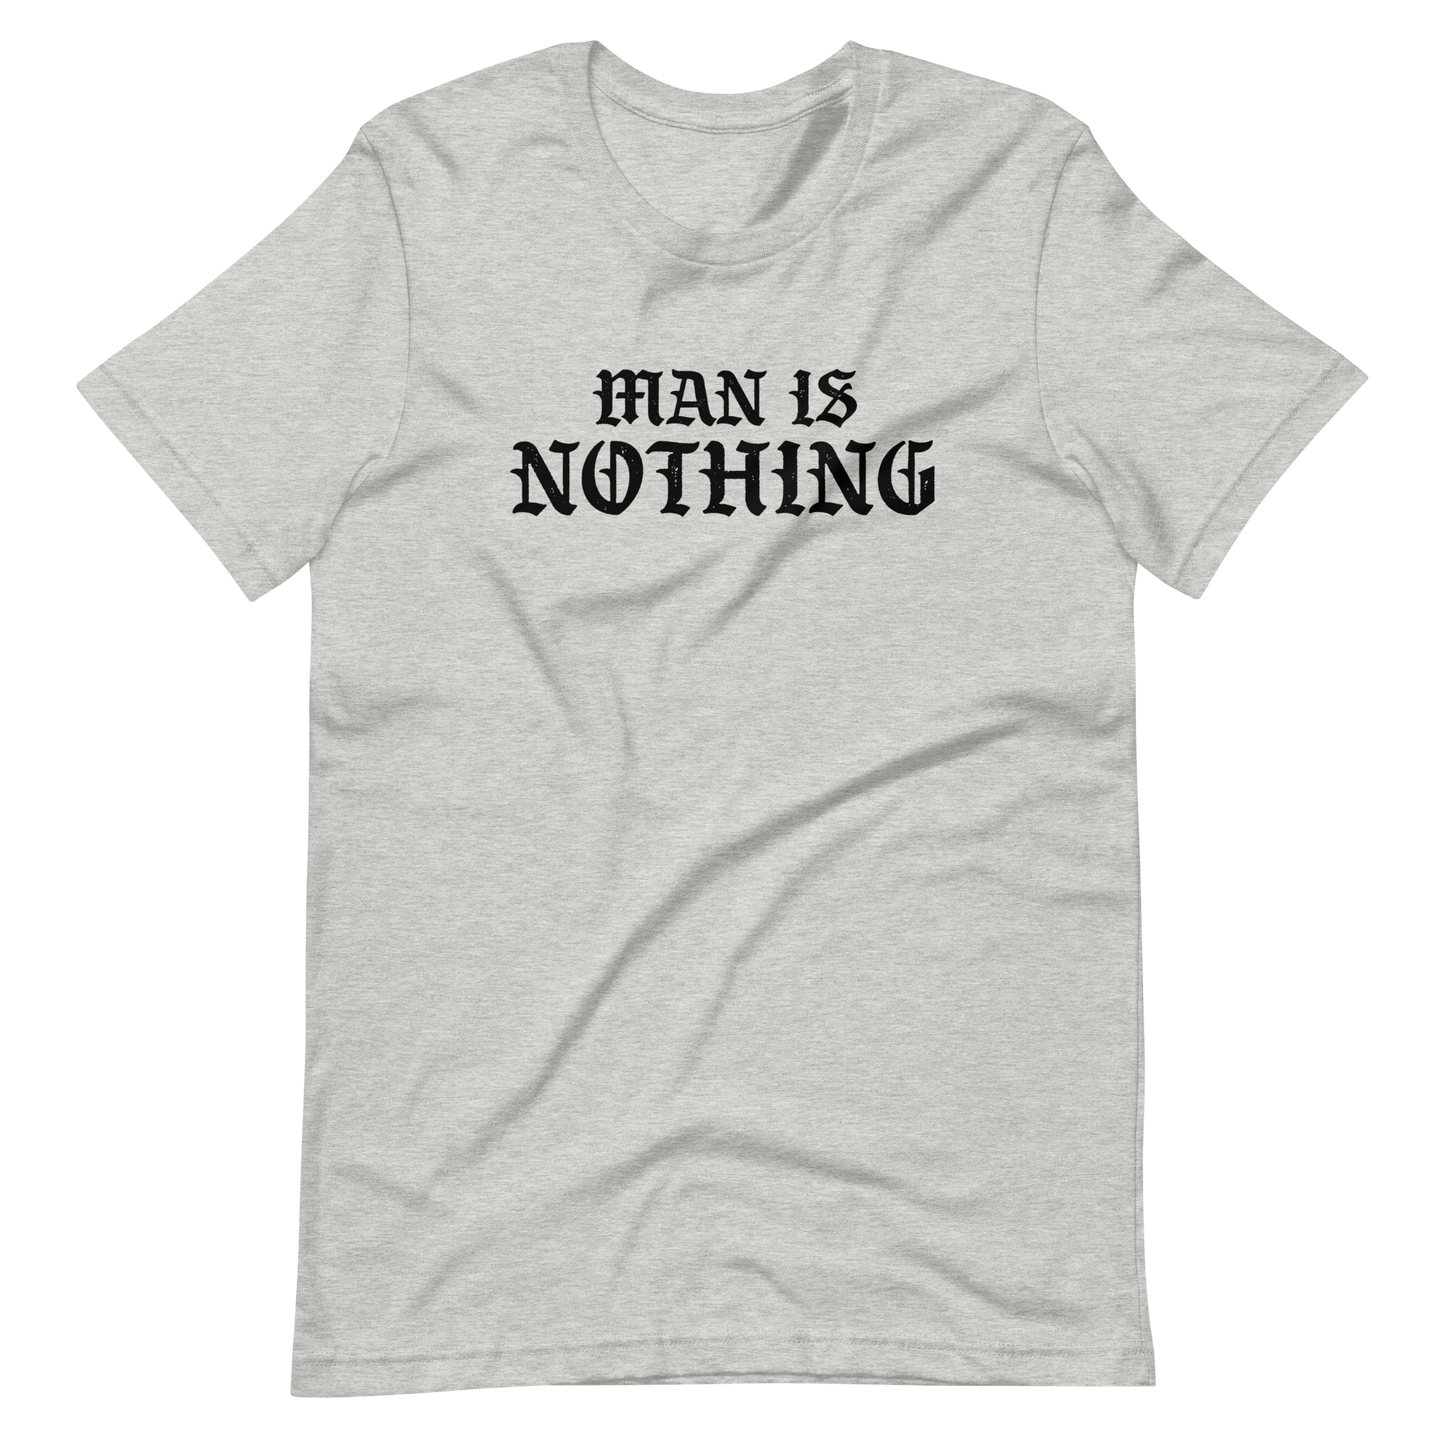 Man Is Nothing T-Shirt